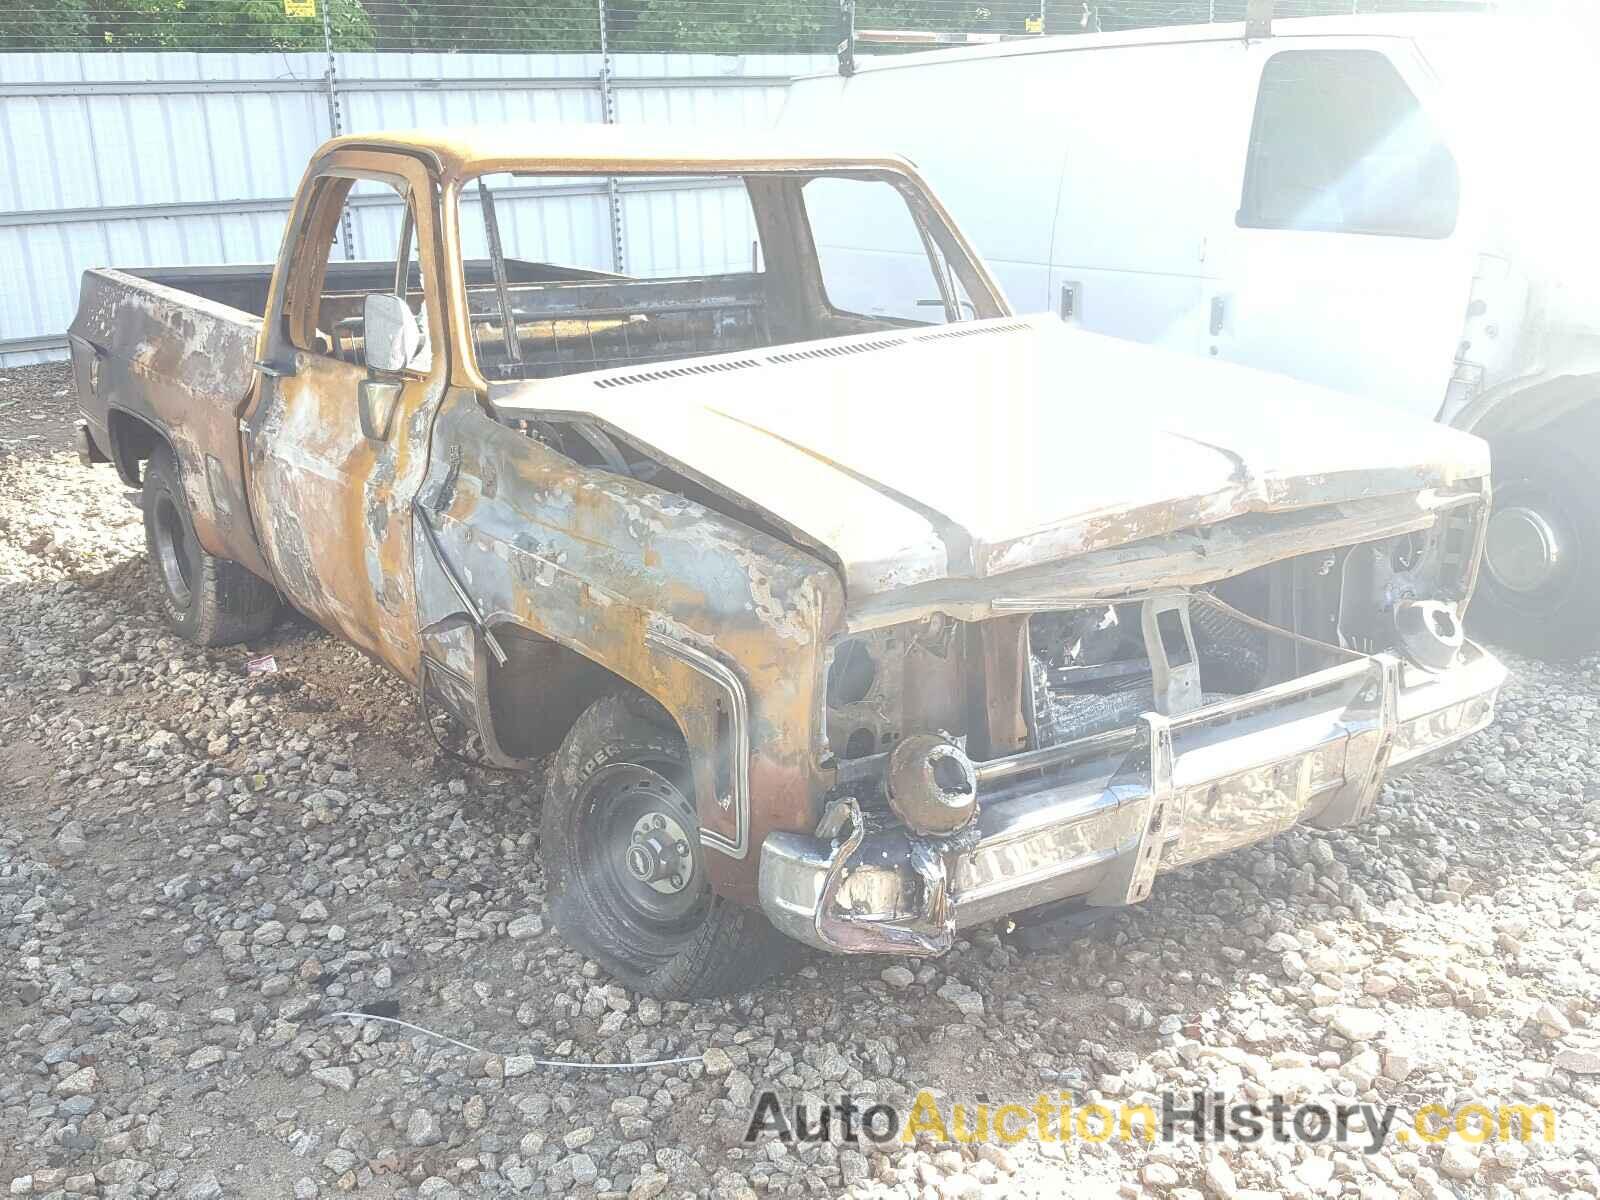 1978 CHEVROLET ALL OTHER, CCL149A117636